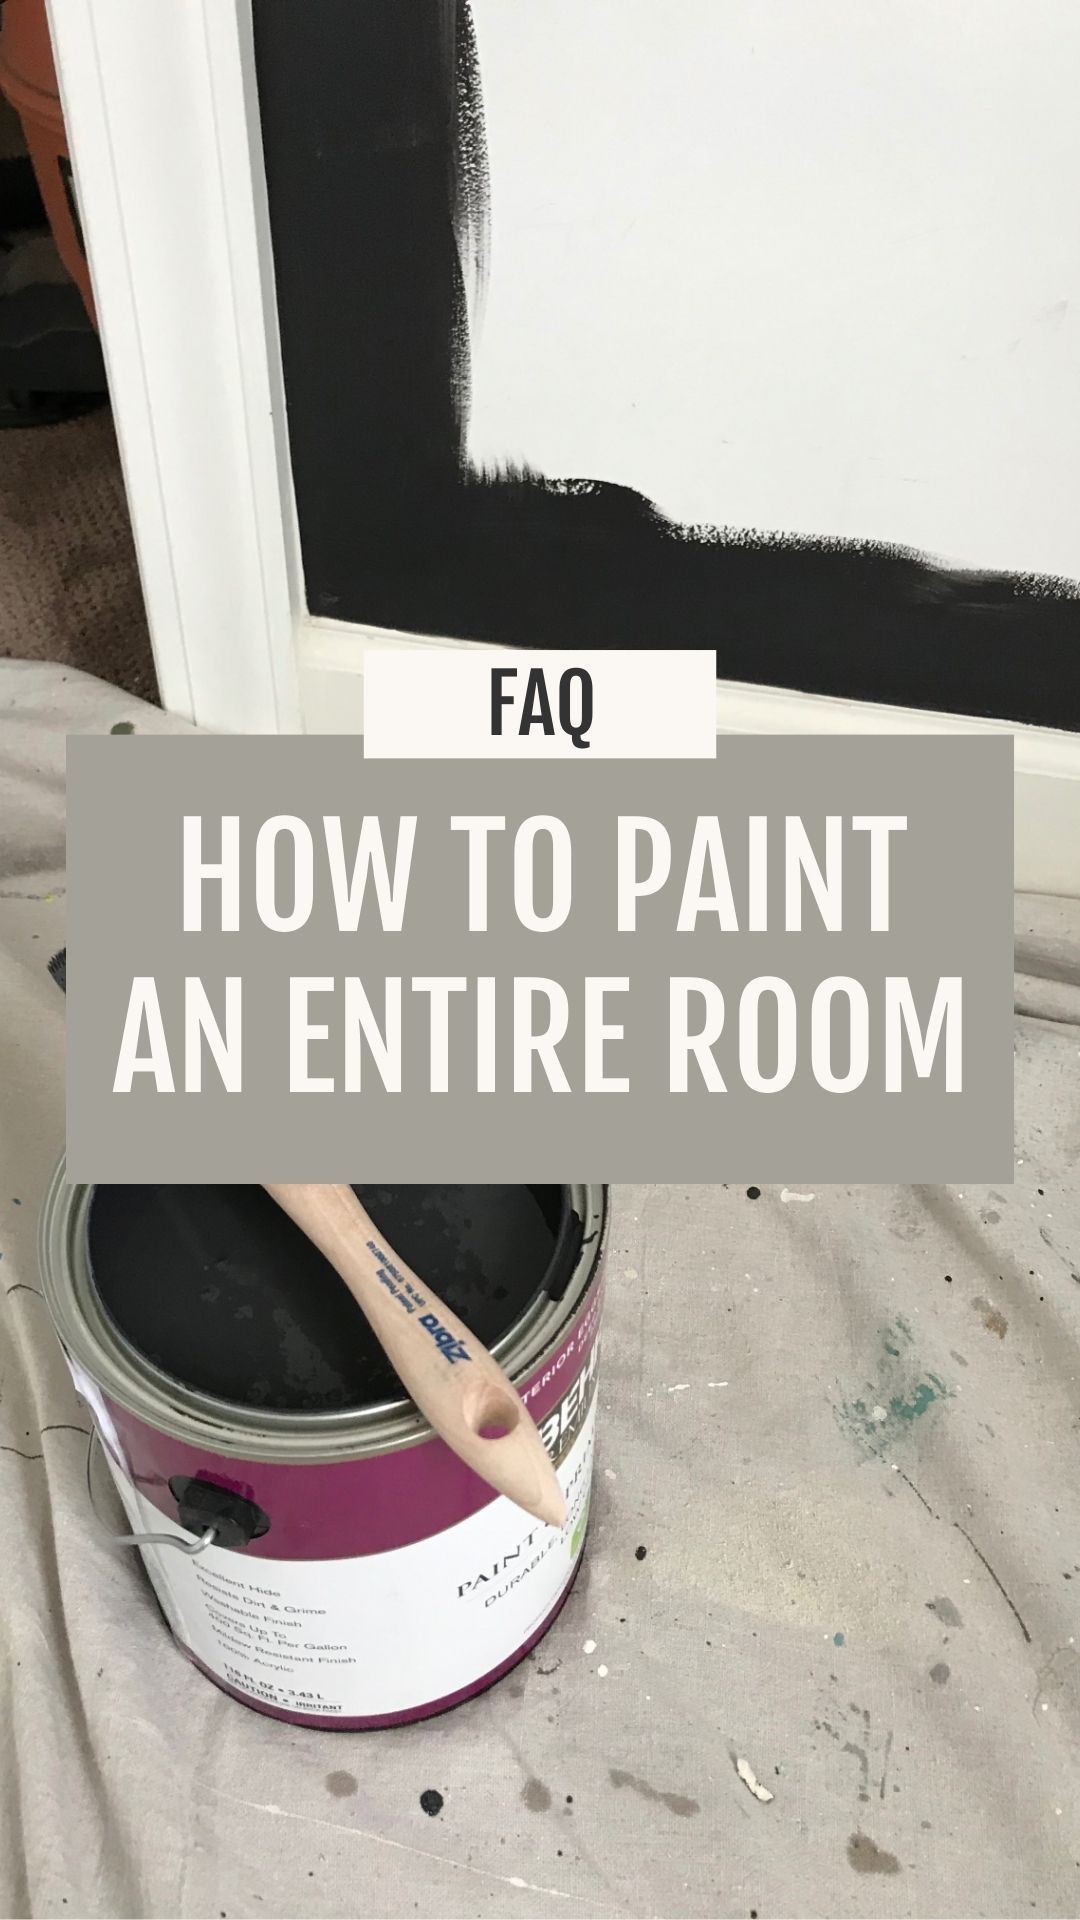 paint can opened, paint brush with black paint, wall cut in painted